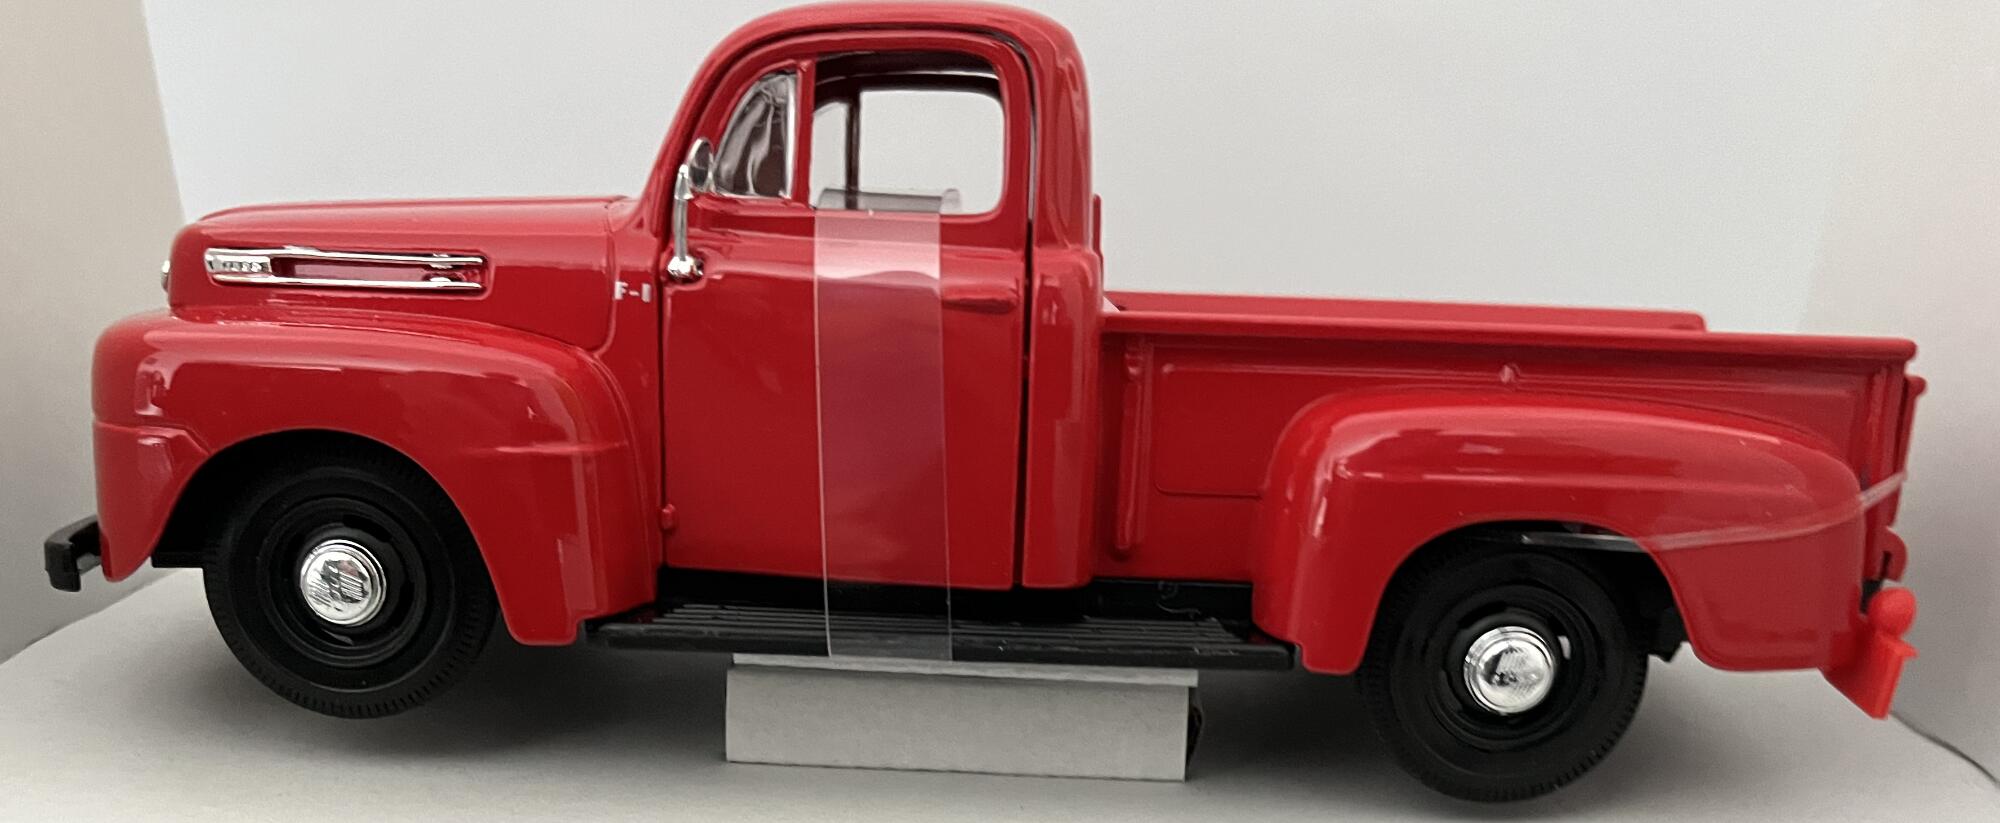 Ford F-1 Pickup 1948 in red, 1:25 scale diecast classic USA model from Maisto, MAi31935R